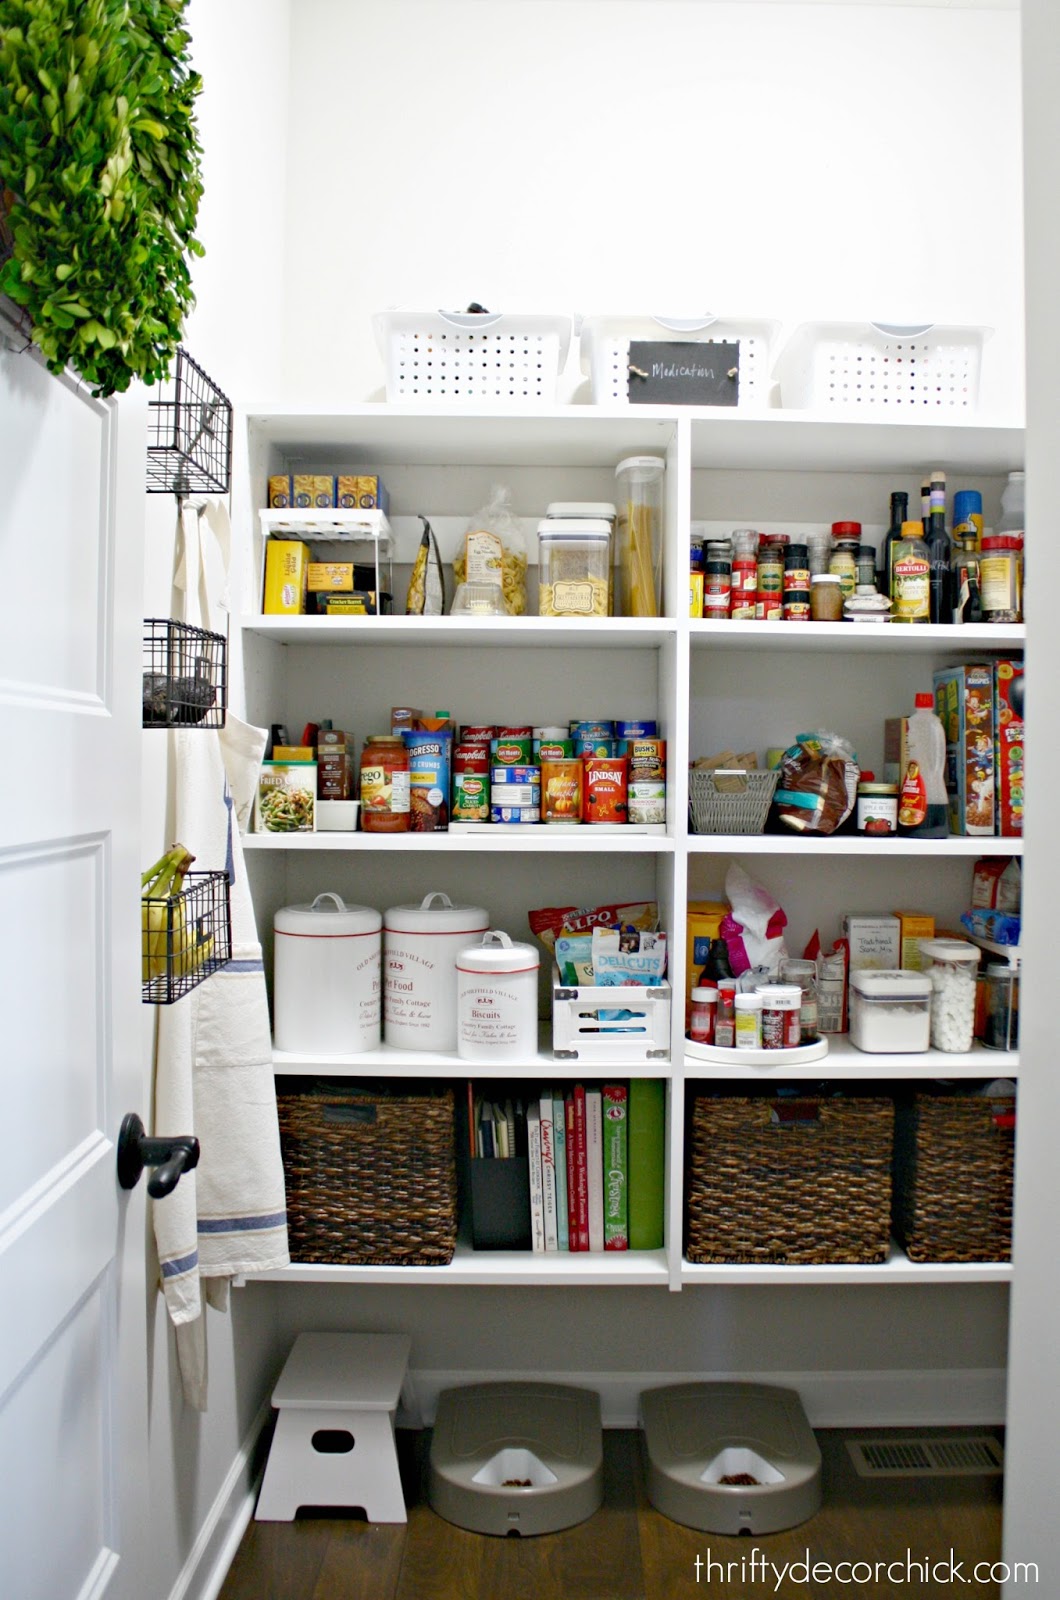 Prevent Rattan Baskets From Scratching, How To Protect Painted Pantry Shelves